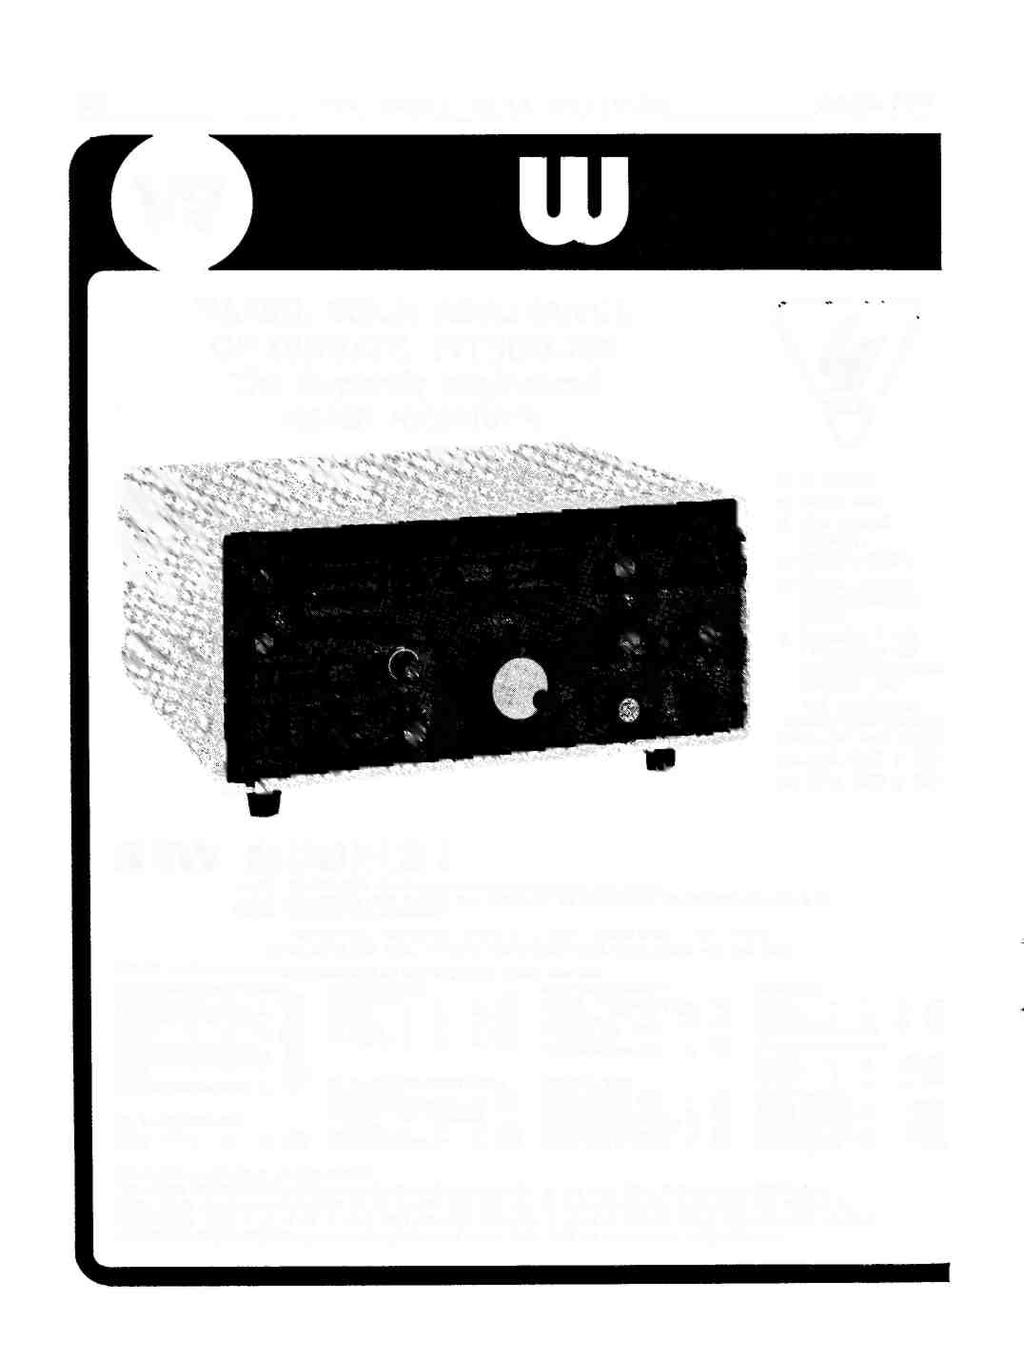 288 THE SHORT WAVE MAGAZINE August, 1974 YAESU, YOUR ASSURANCE OF QUALITY, INTRODUCE The Superbly engineered FR -11 RECEIVER YAESU NEW MODELS!